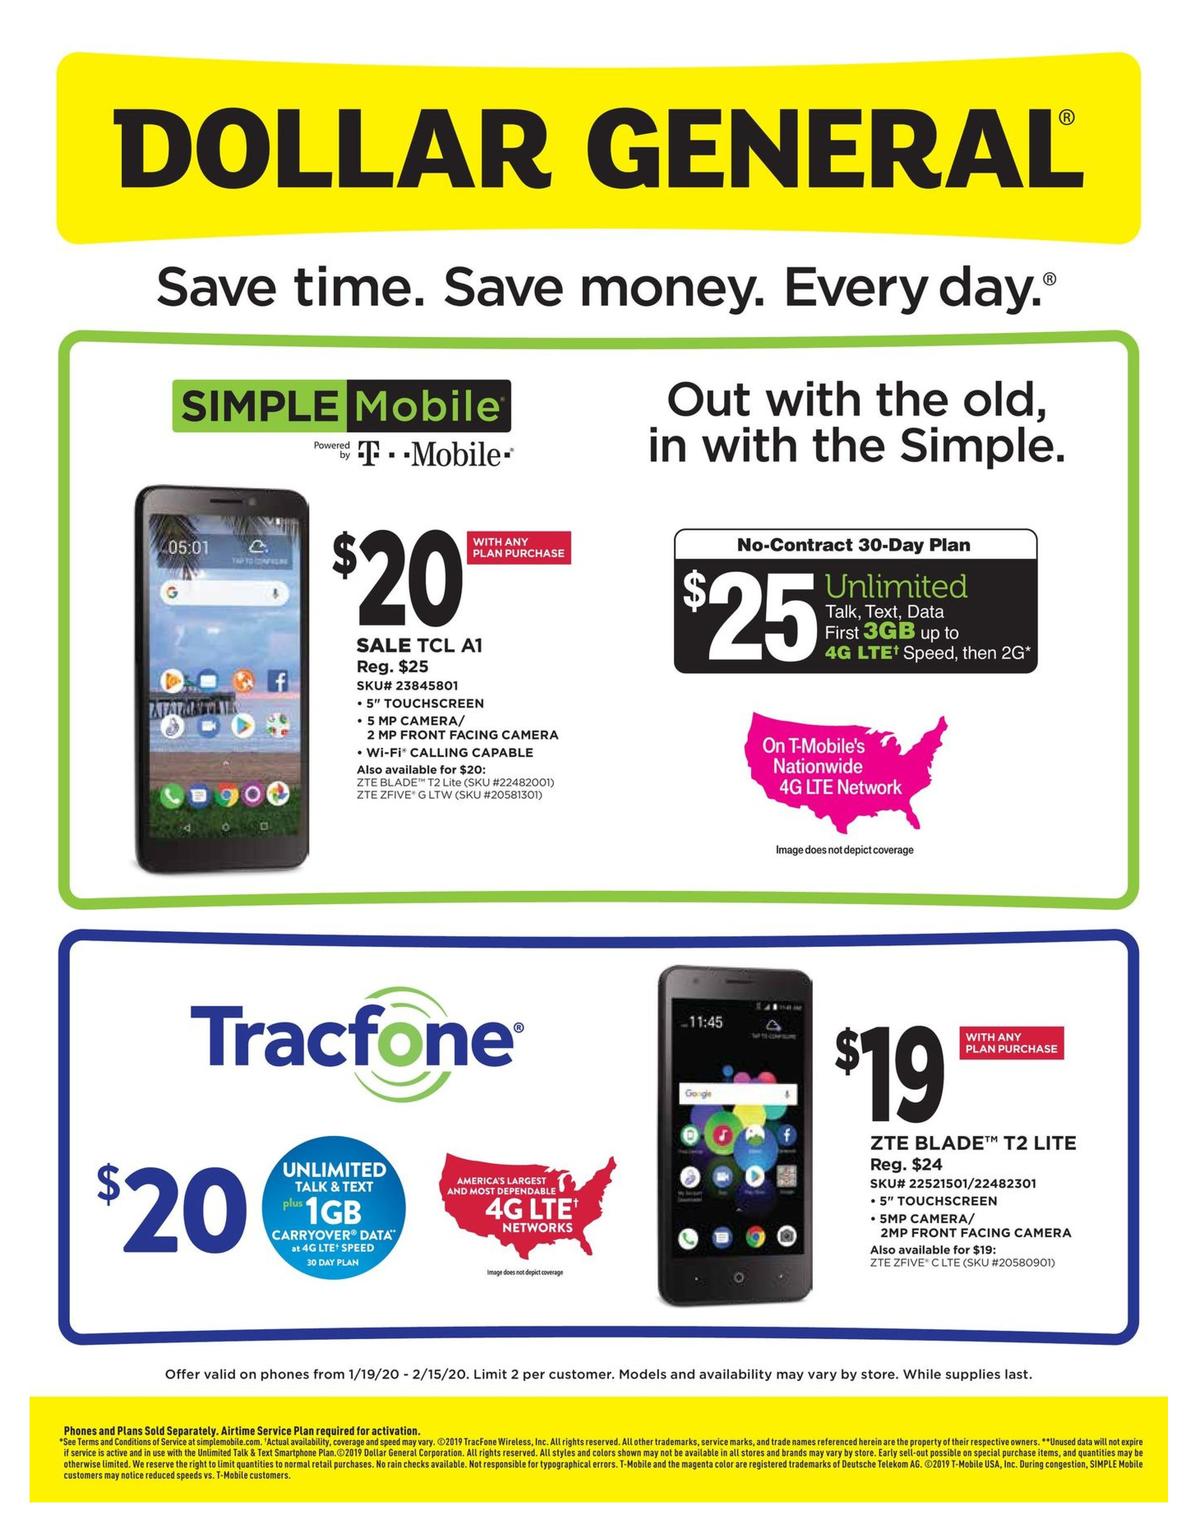 Dollar General Weekly Wireless Specials Weekly Ad from January 19